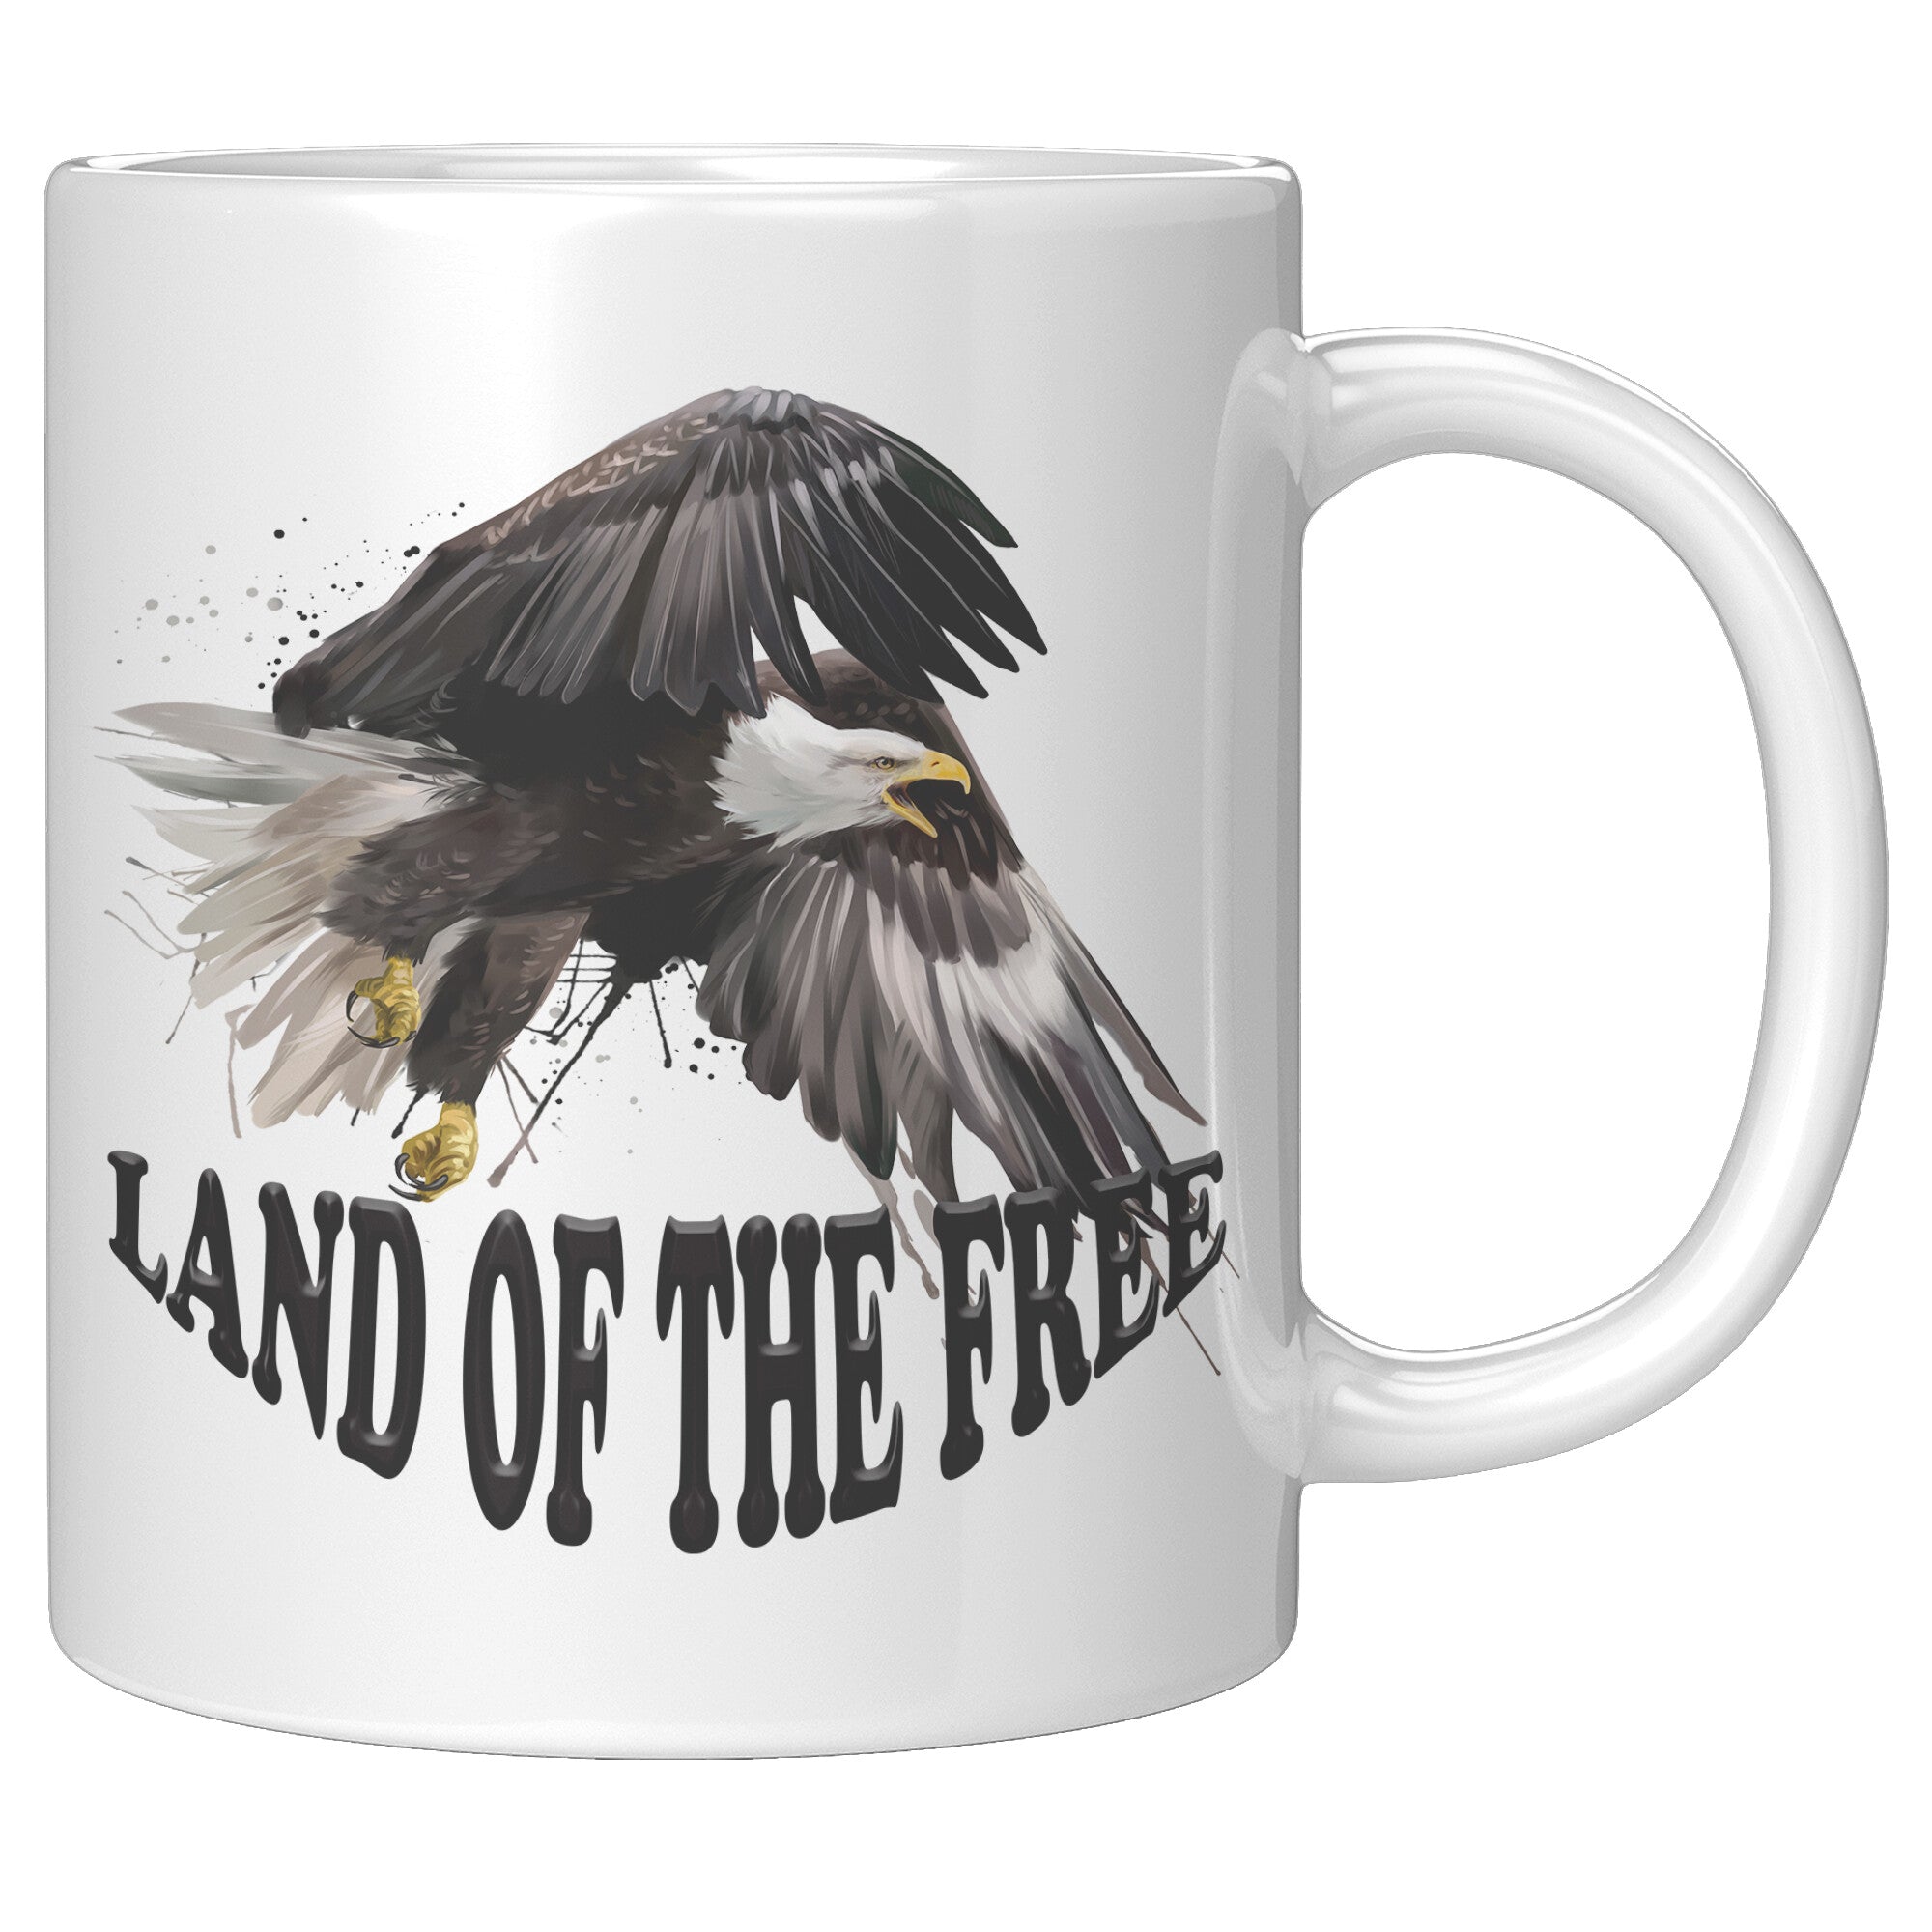 FLYING EAGLE  -LAND OF THE FREE